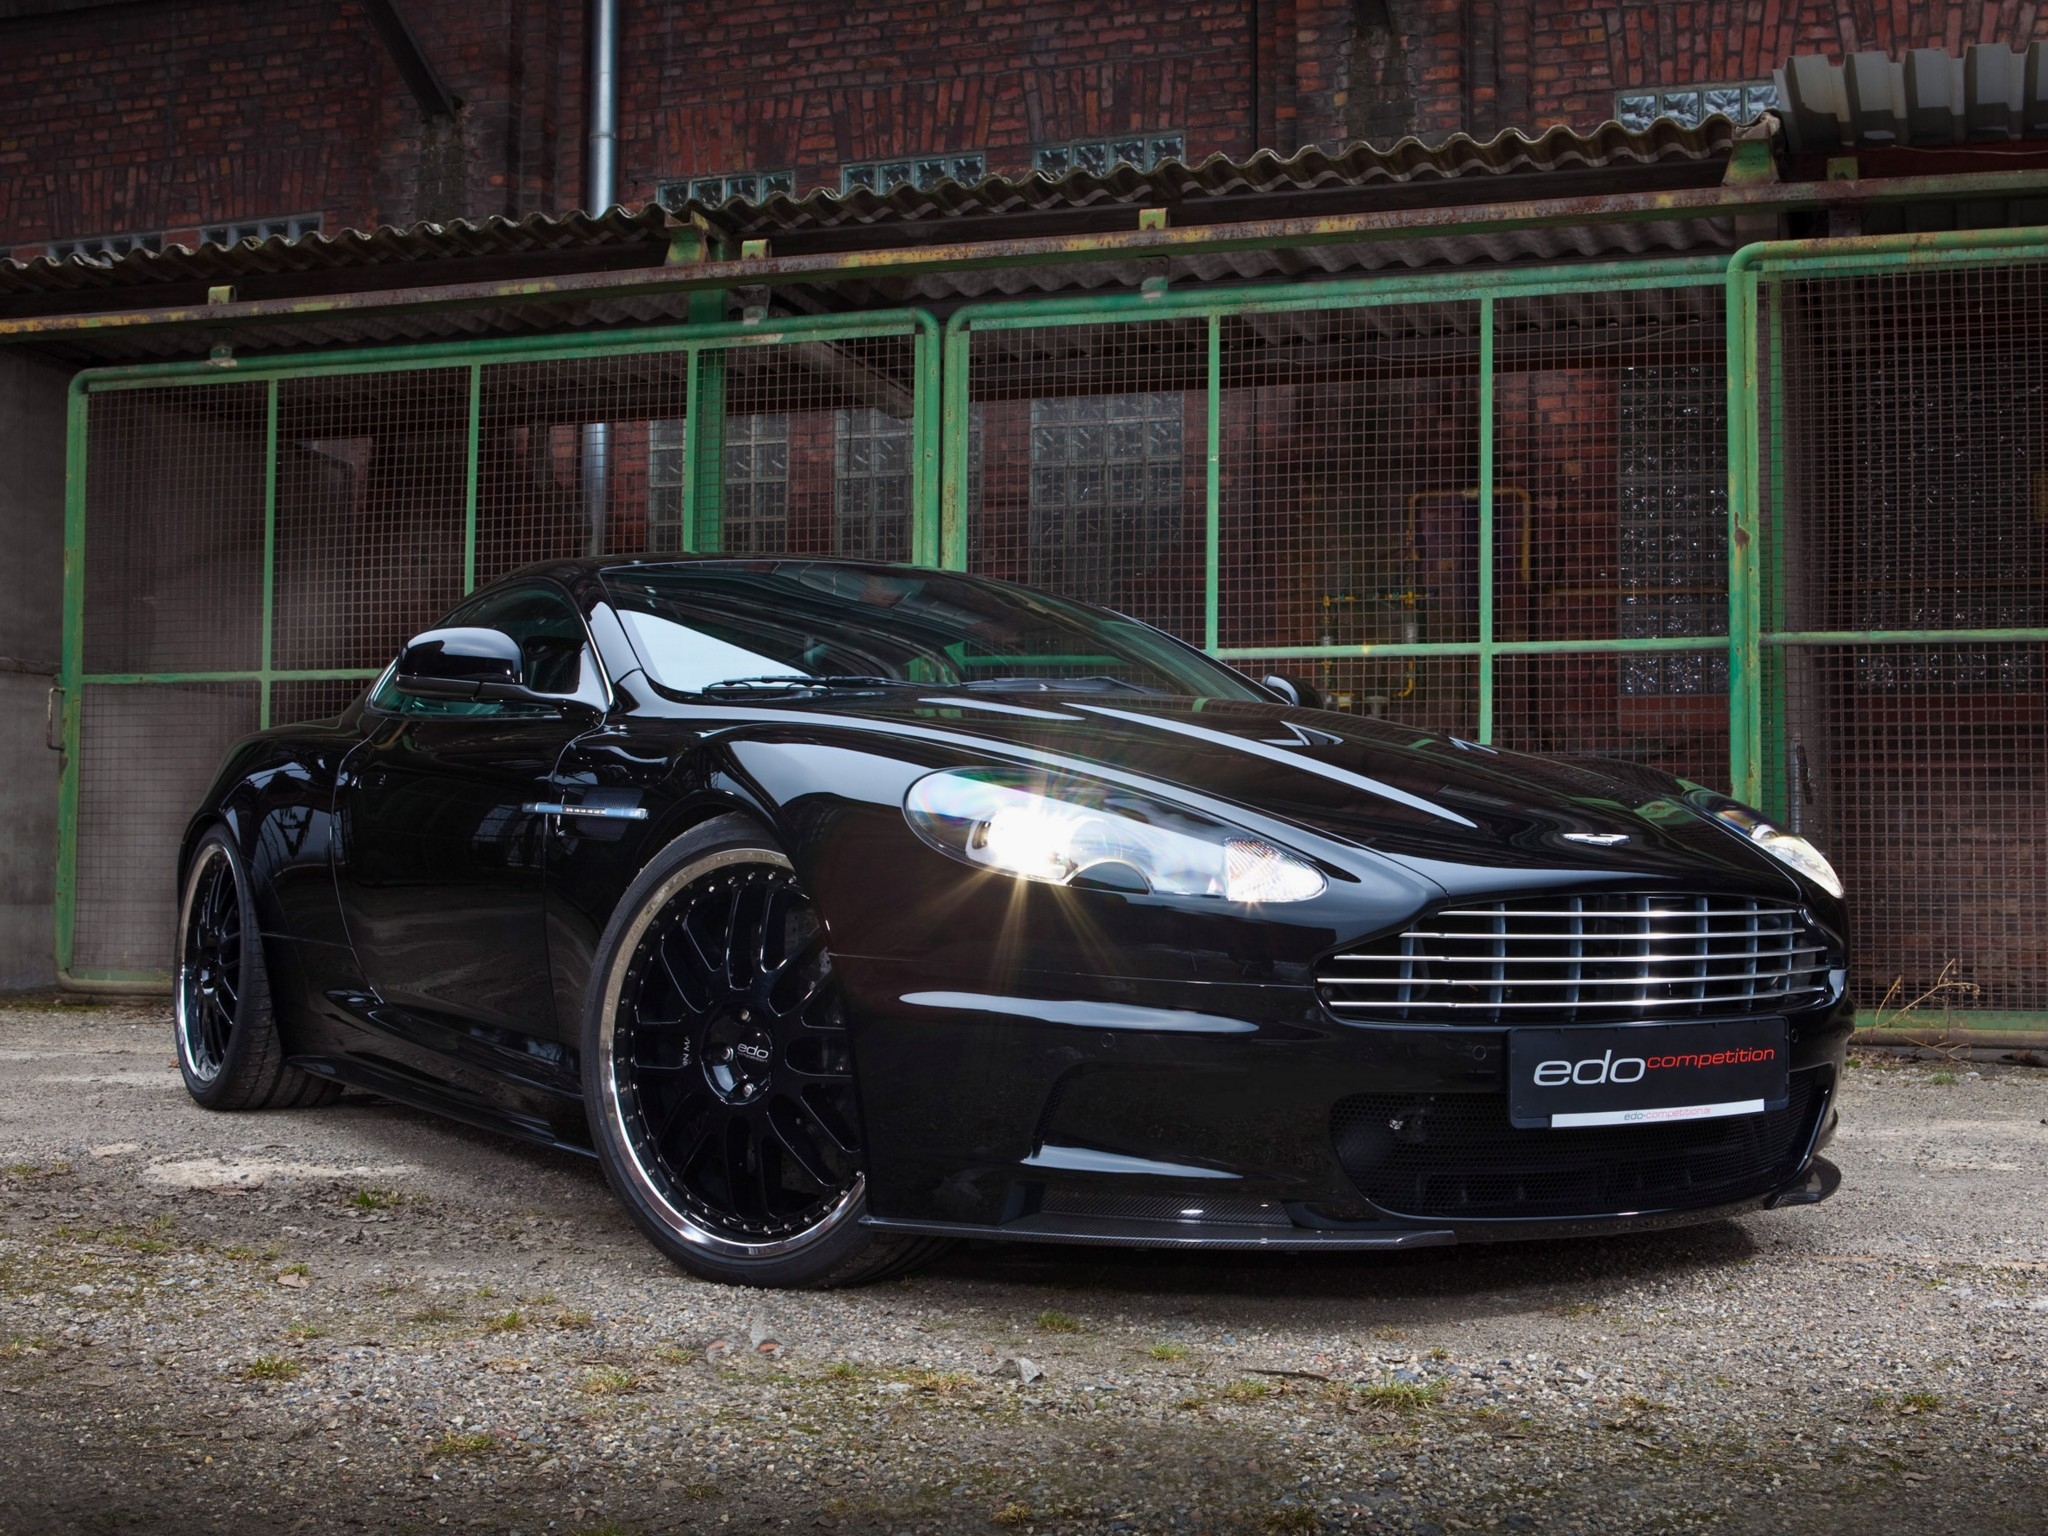 dbs, cars, sports, aston martin, black, building, front view, 2010 mobile wallpaper